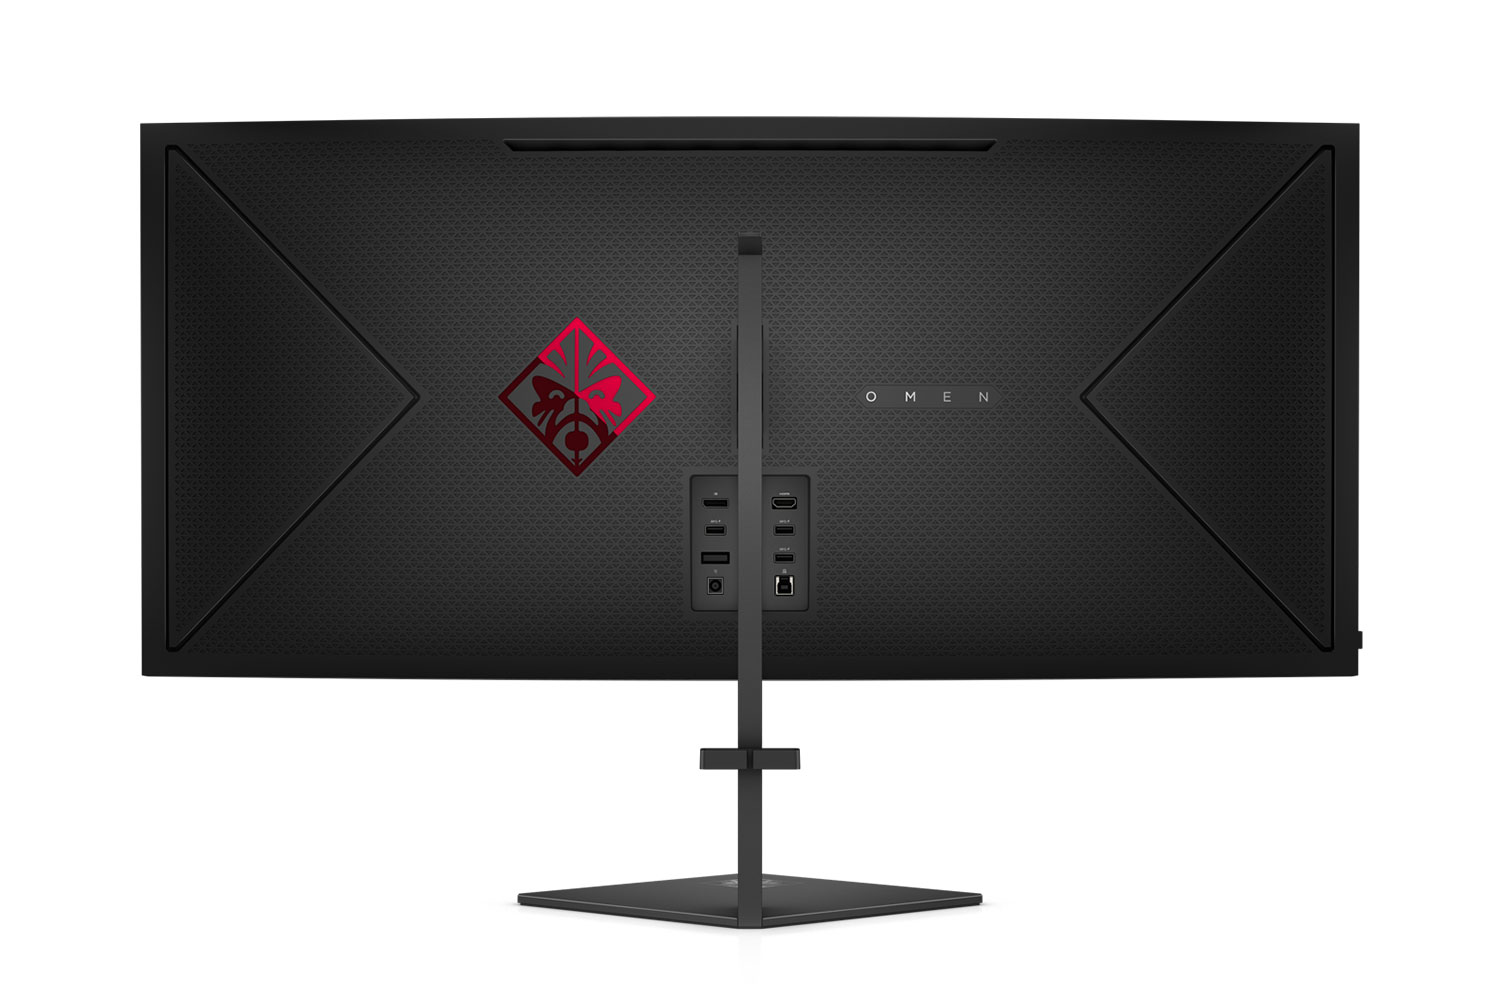 Omen X 35-inch curved display